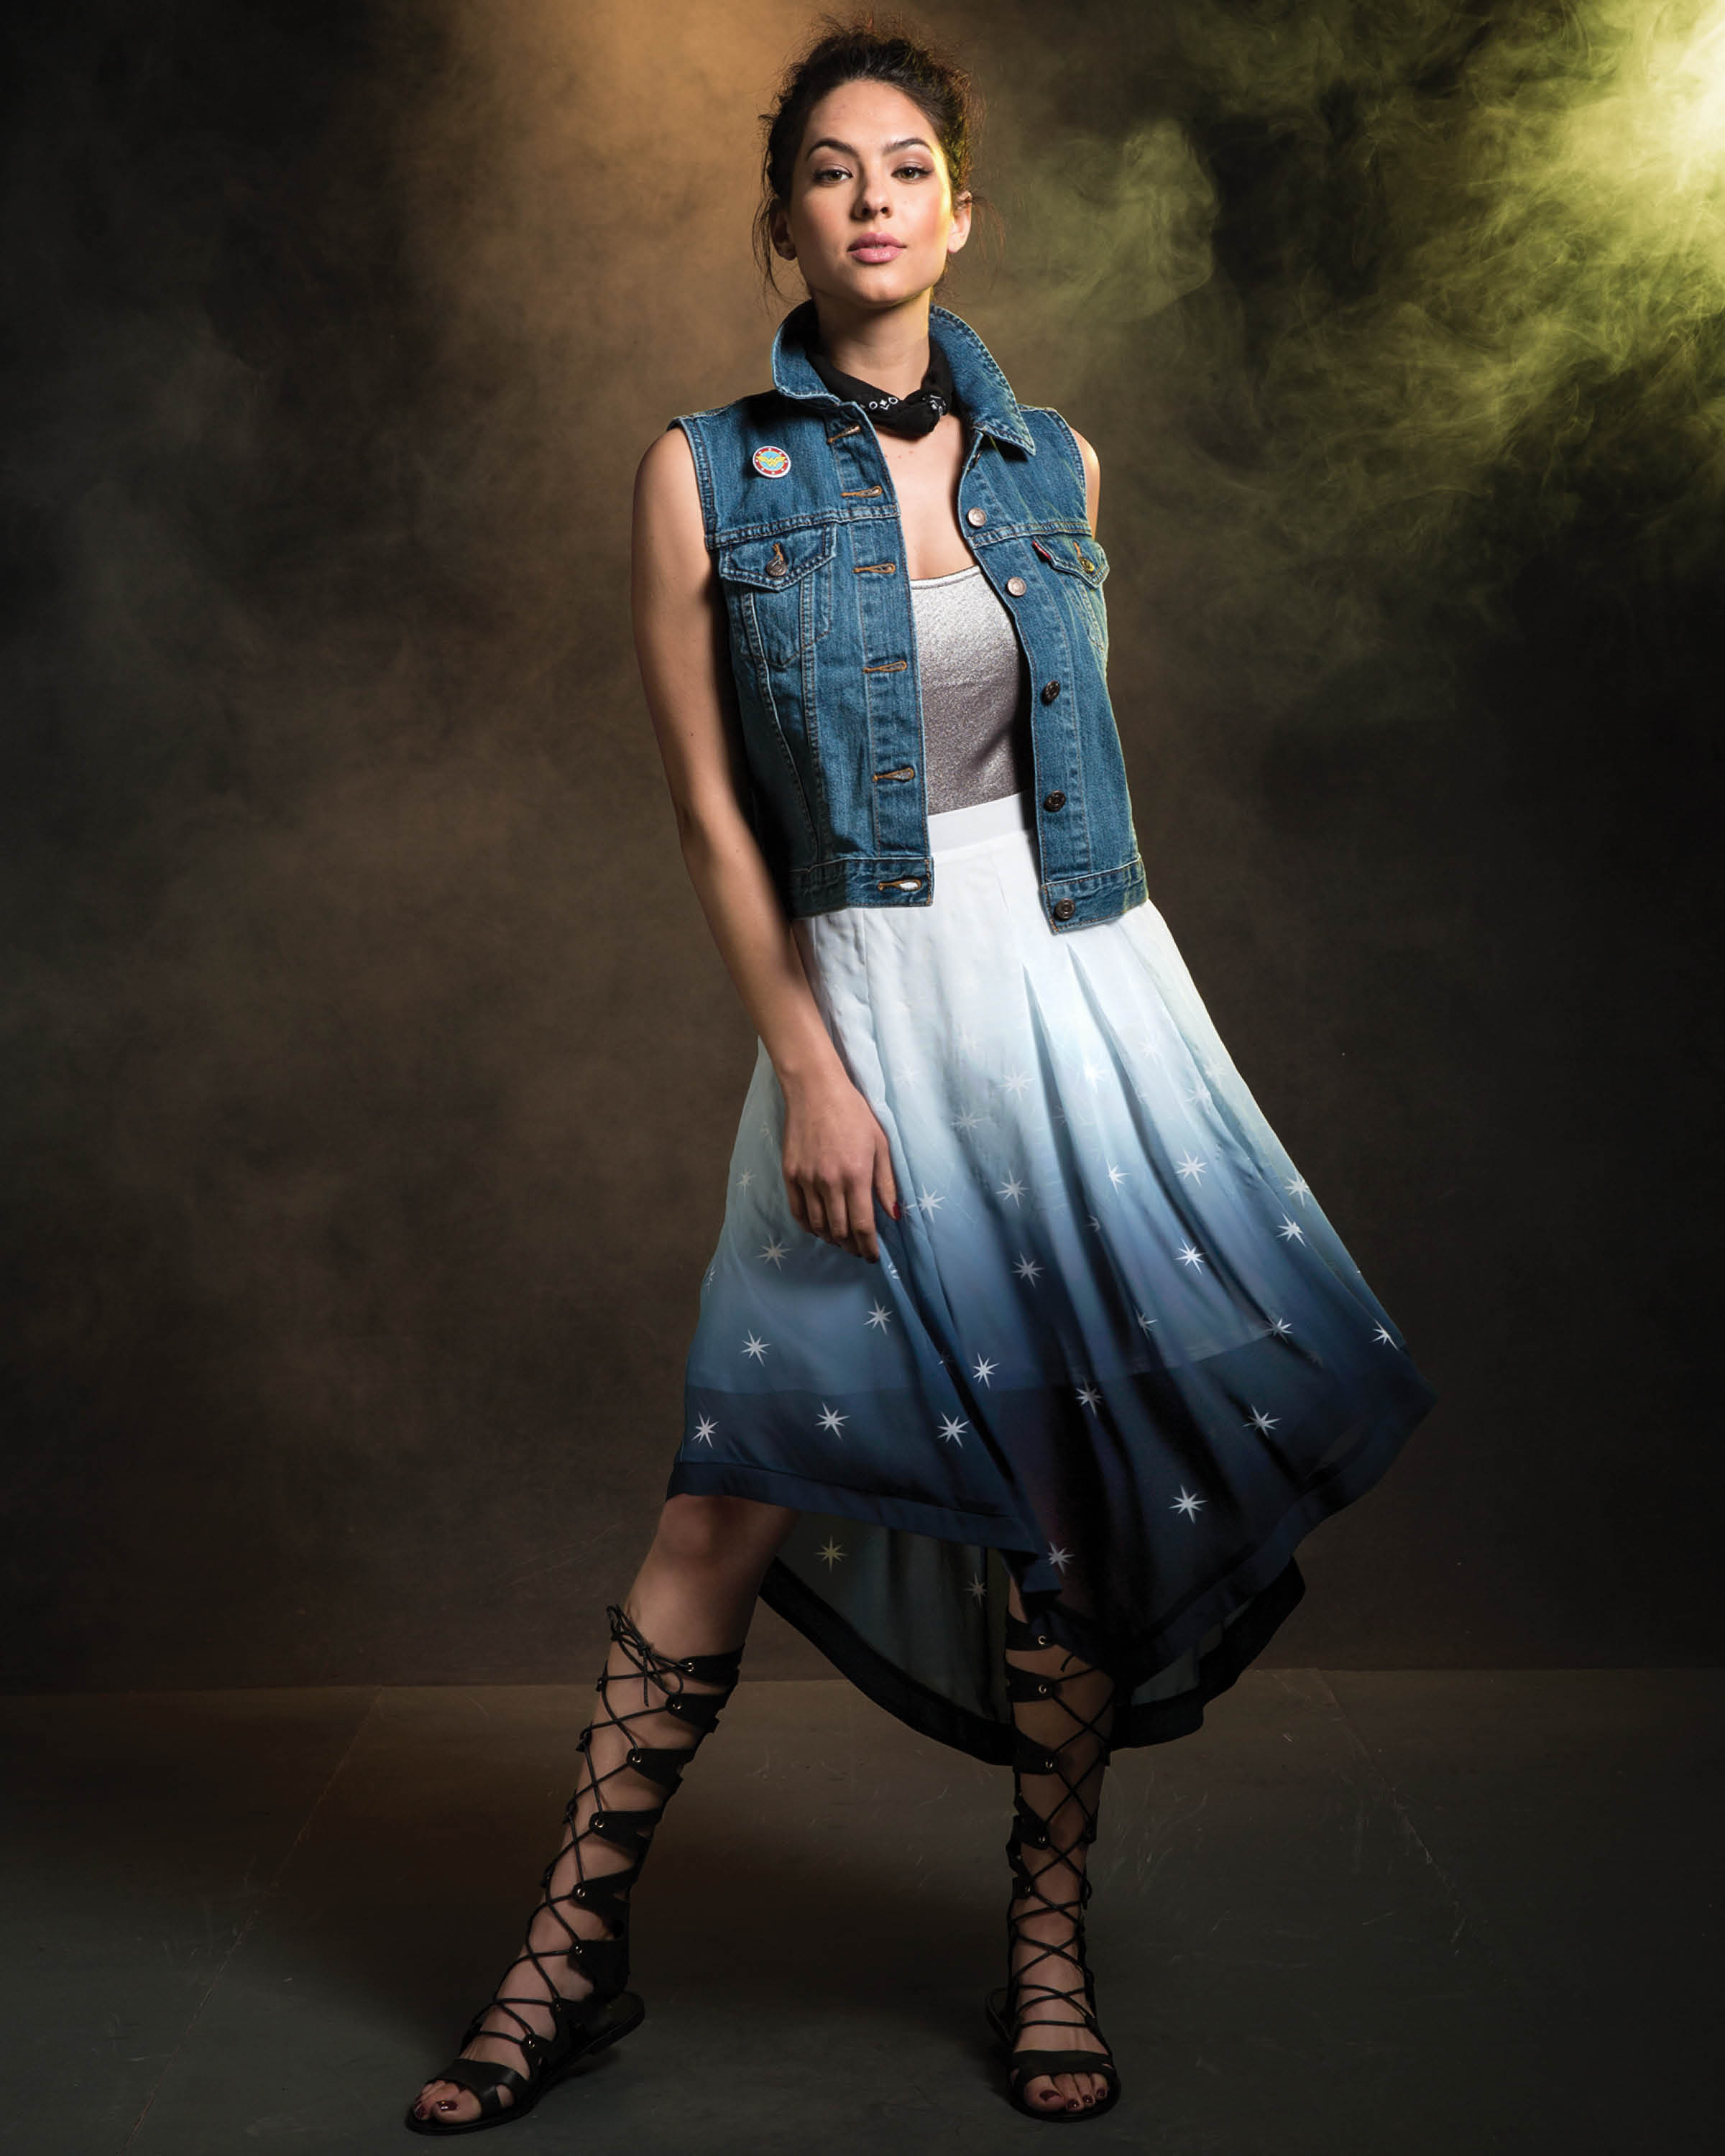 Wonder Woman has now inspired her own collection of fangirl fashion, courtesy of powerhouse & lifestyle brand Her Universe. Part of the collection includes this Ombre High-Lo Skirt.